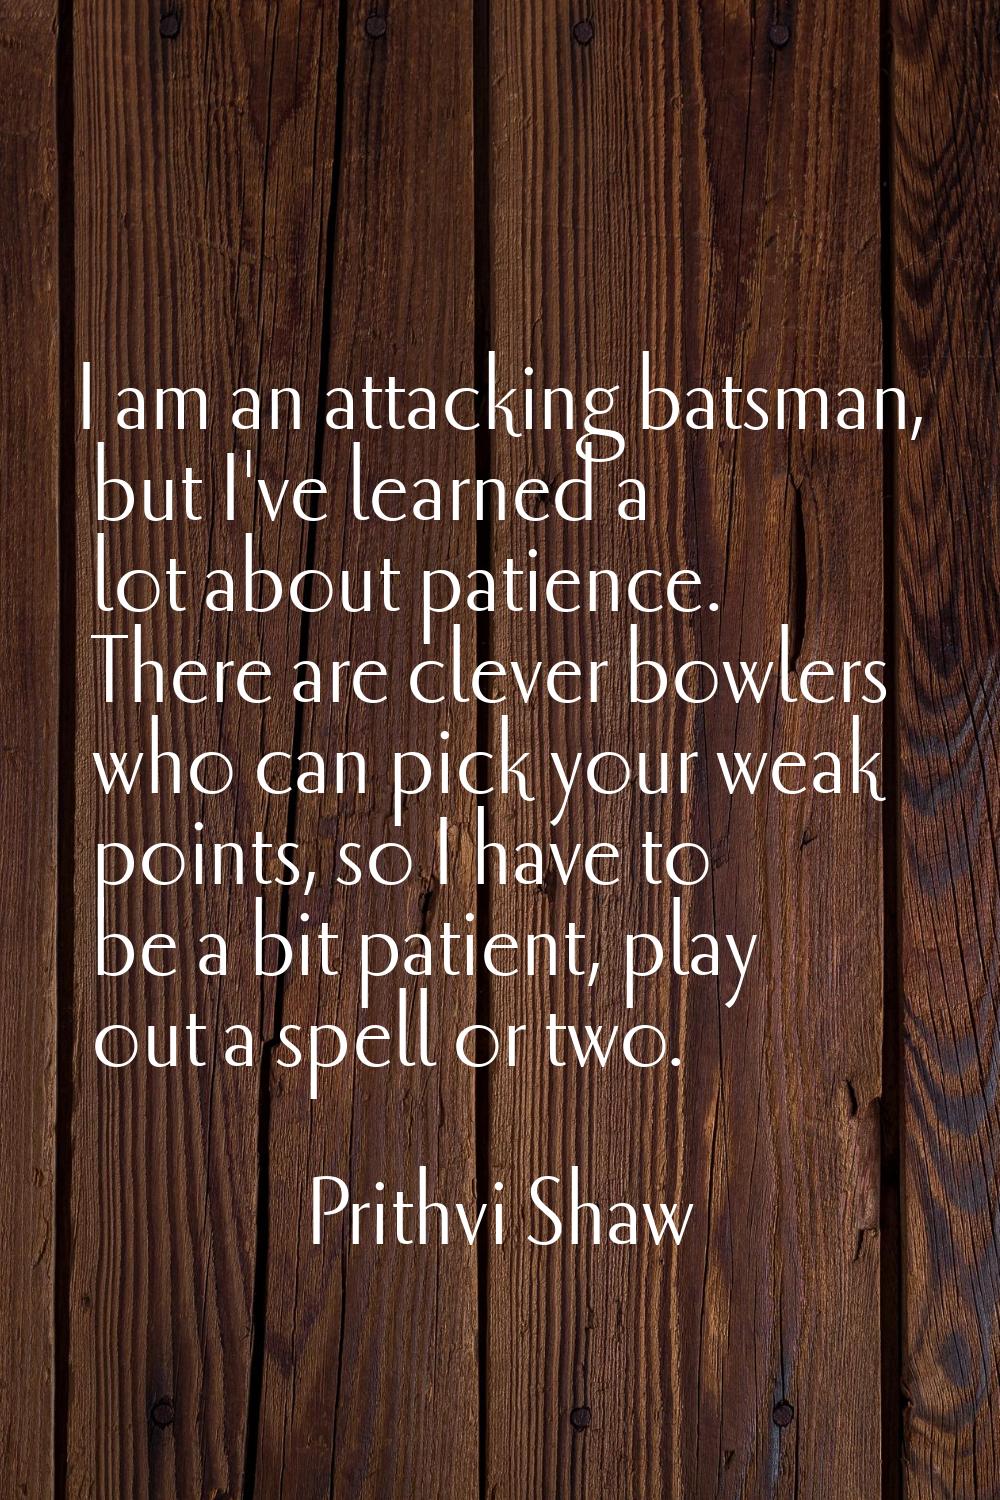 I am an attacking batsman, but I've learned a lot about patience. There are clever bowlers who can 